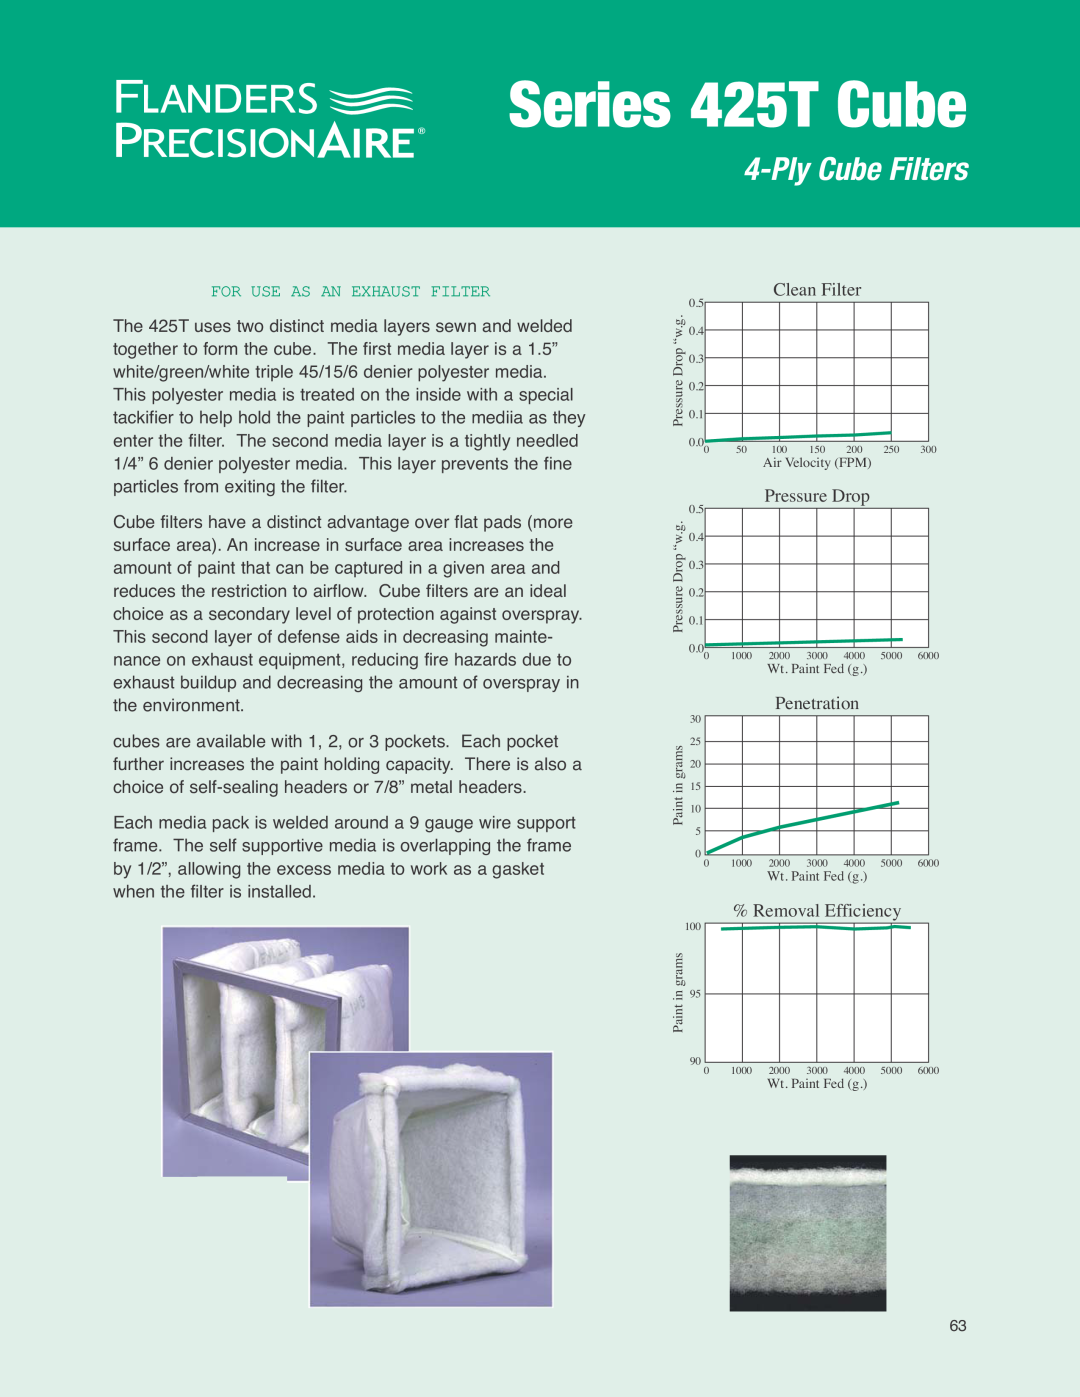 Precisionaire Series 425T Cube manual PlyCube Filters, Clean Filter, Pressure Drop, Removal Efficiency, Penetration 